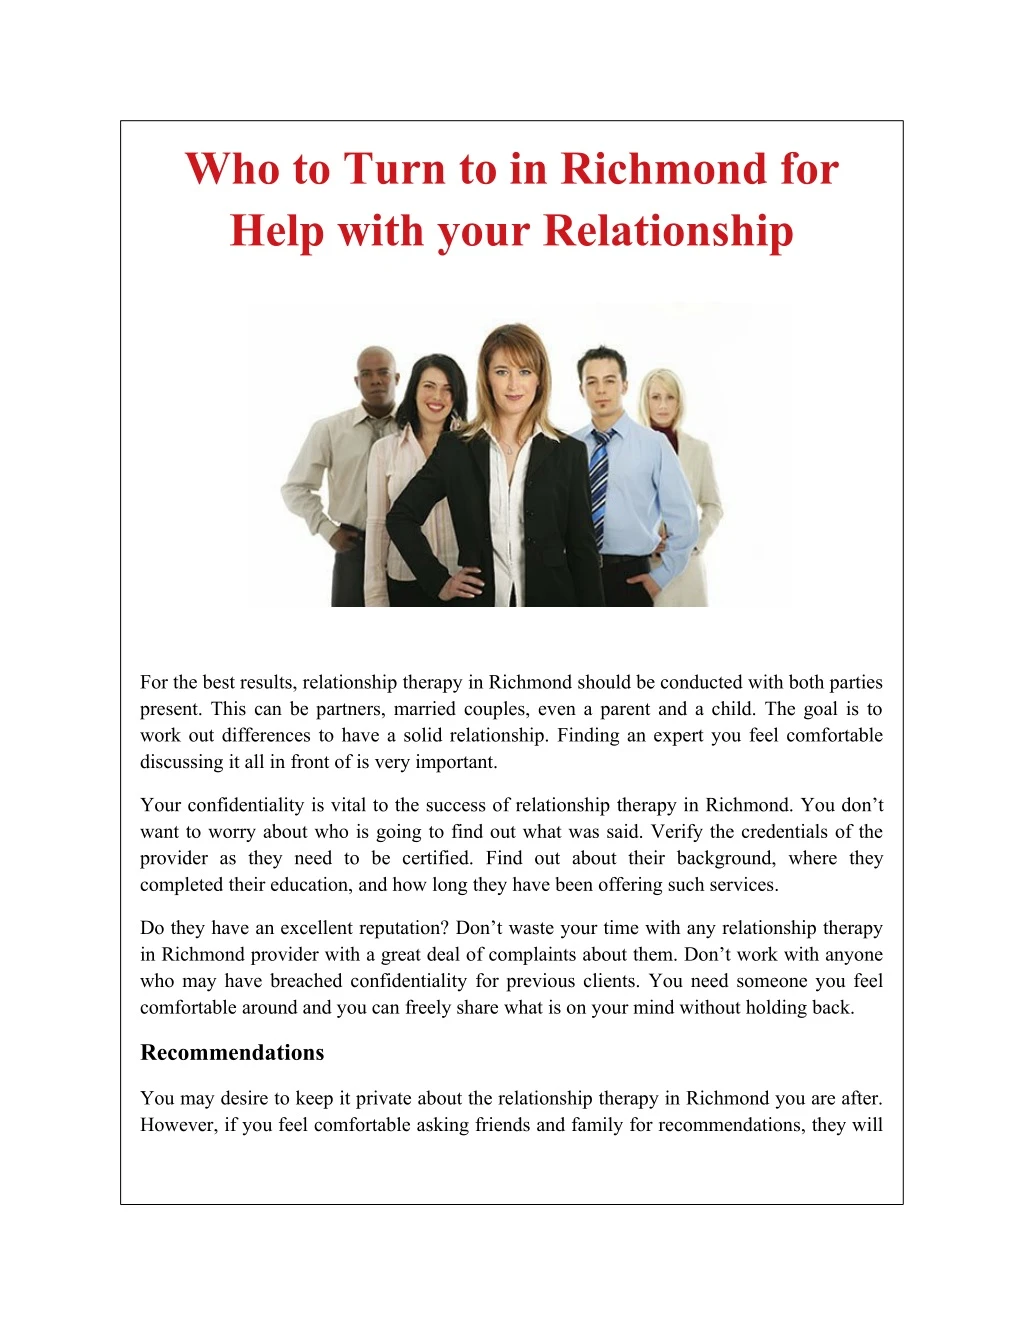 who to turn to in richmond for help with your